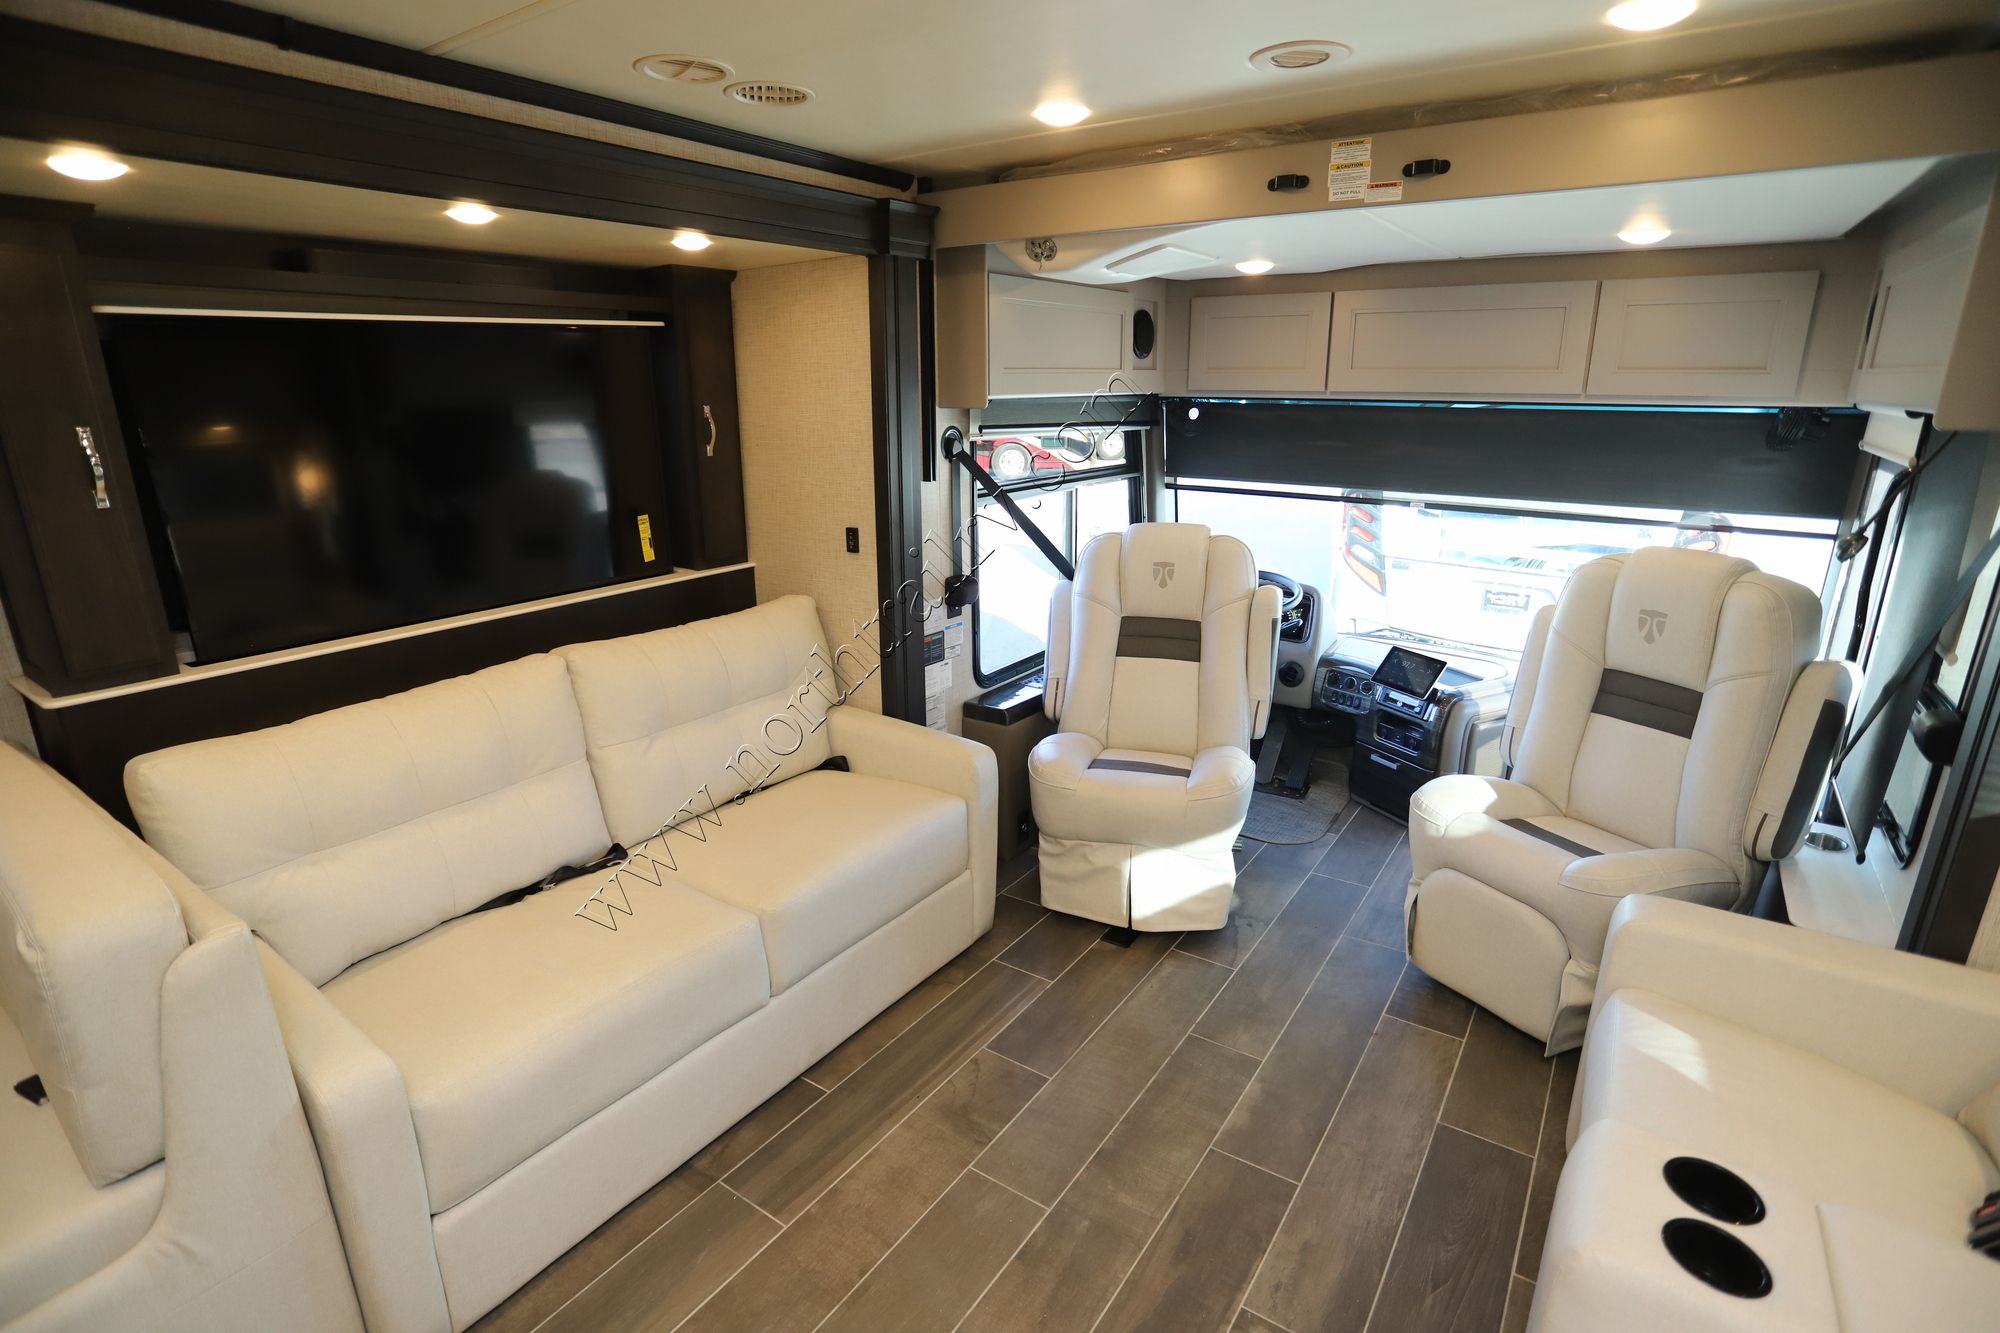 New 2023 Thor Aria 3901 Class A  For Sale